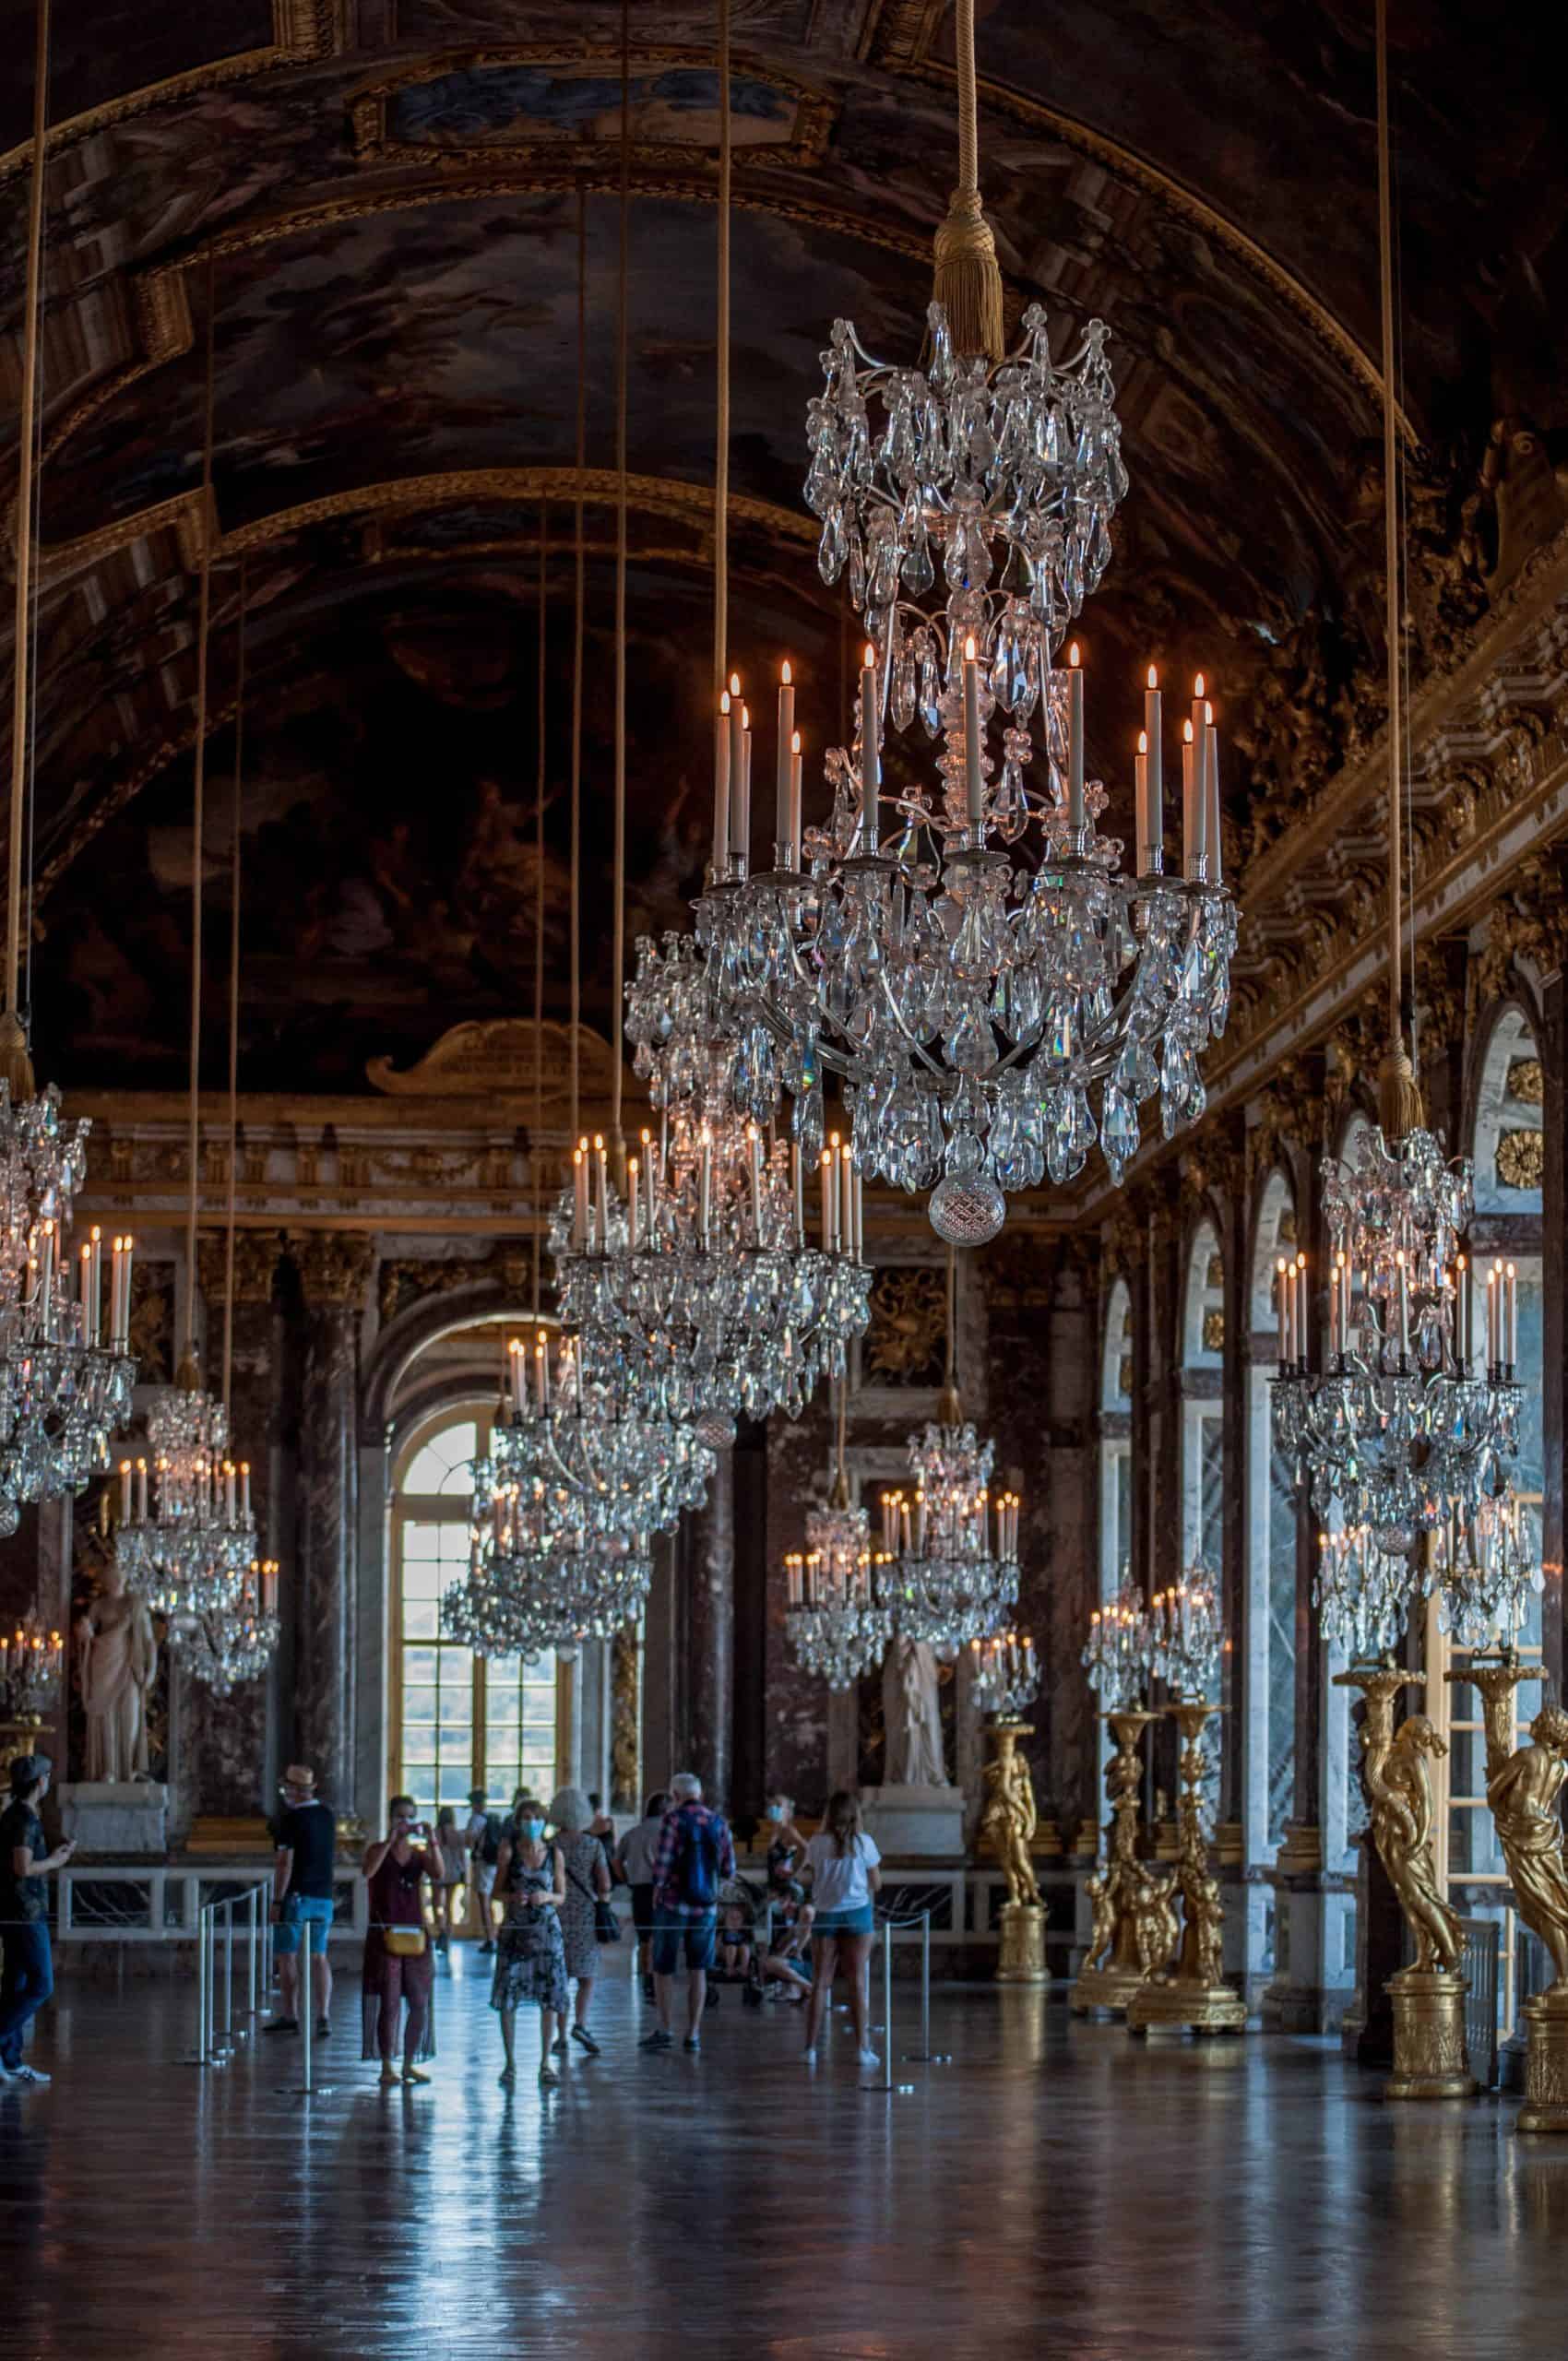 Tourists roam the Hall of Mirrors at the Palace of Versailles in France